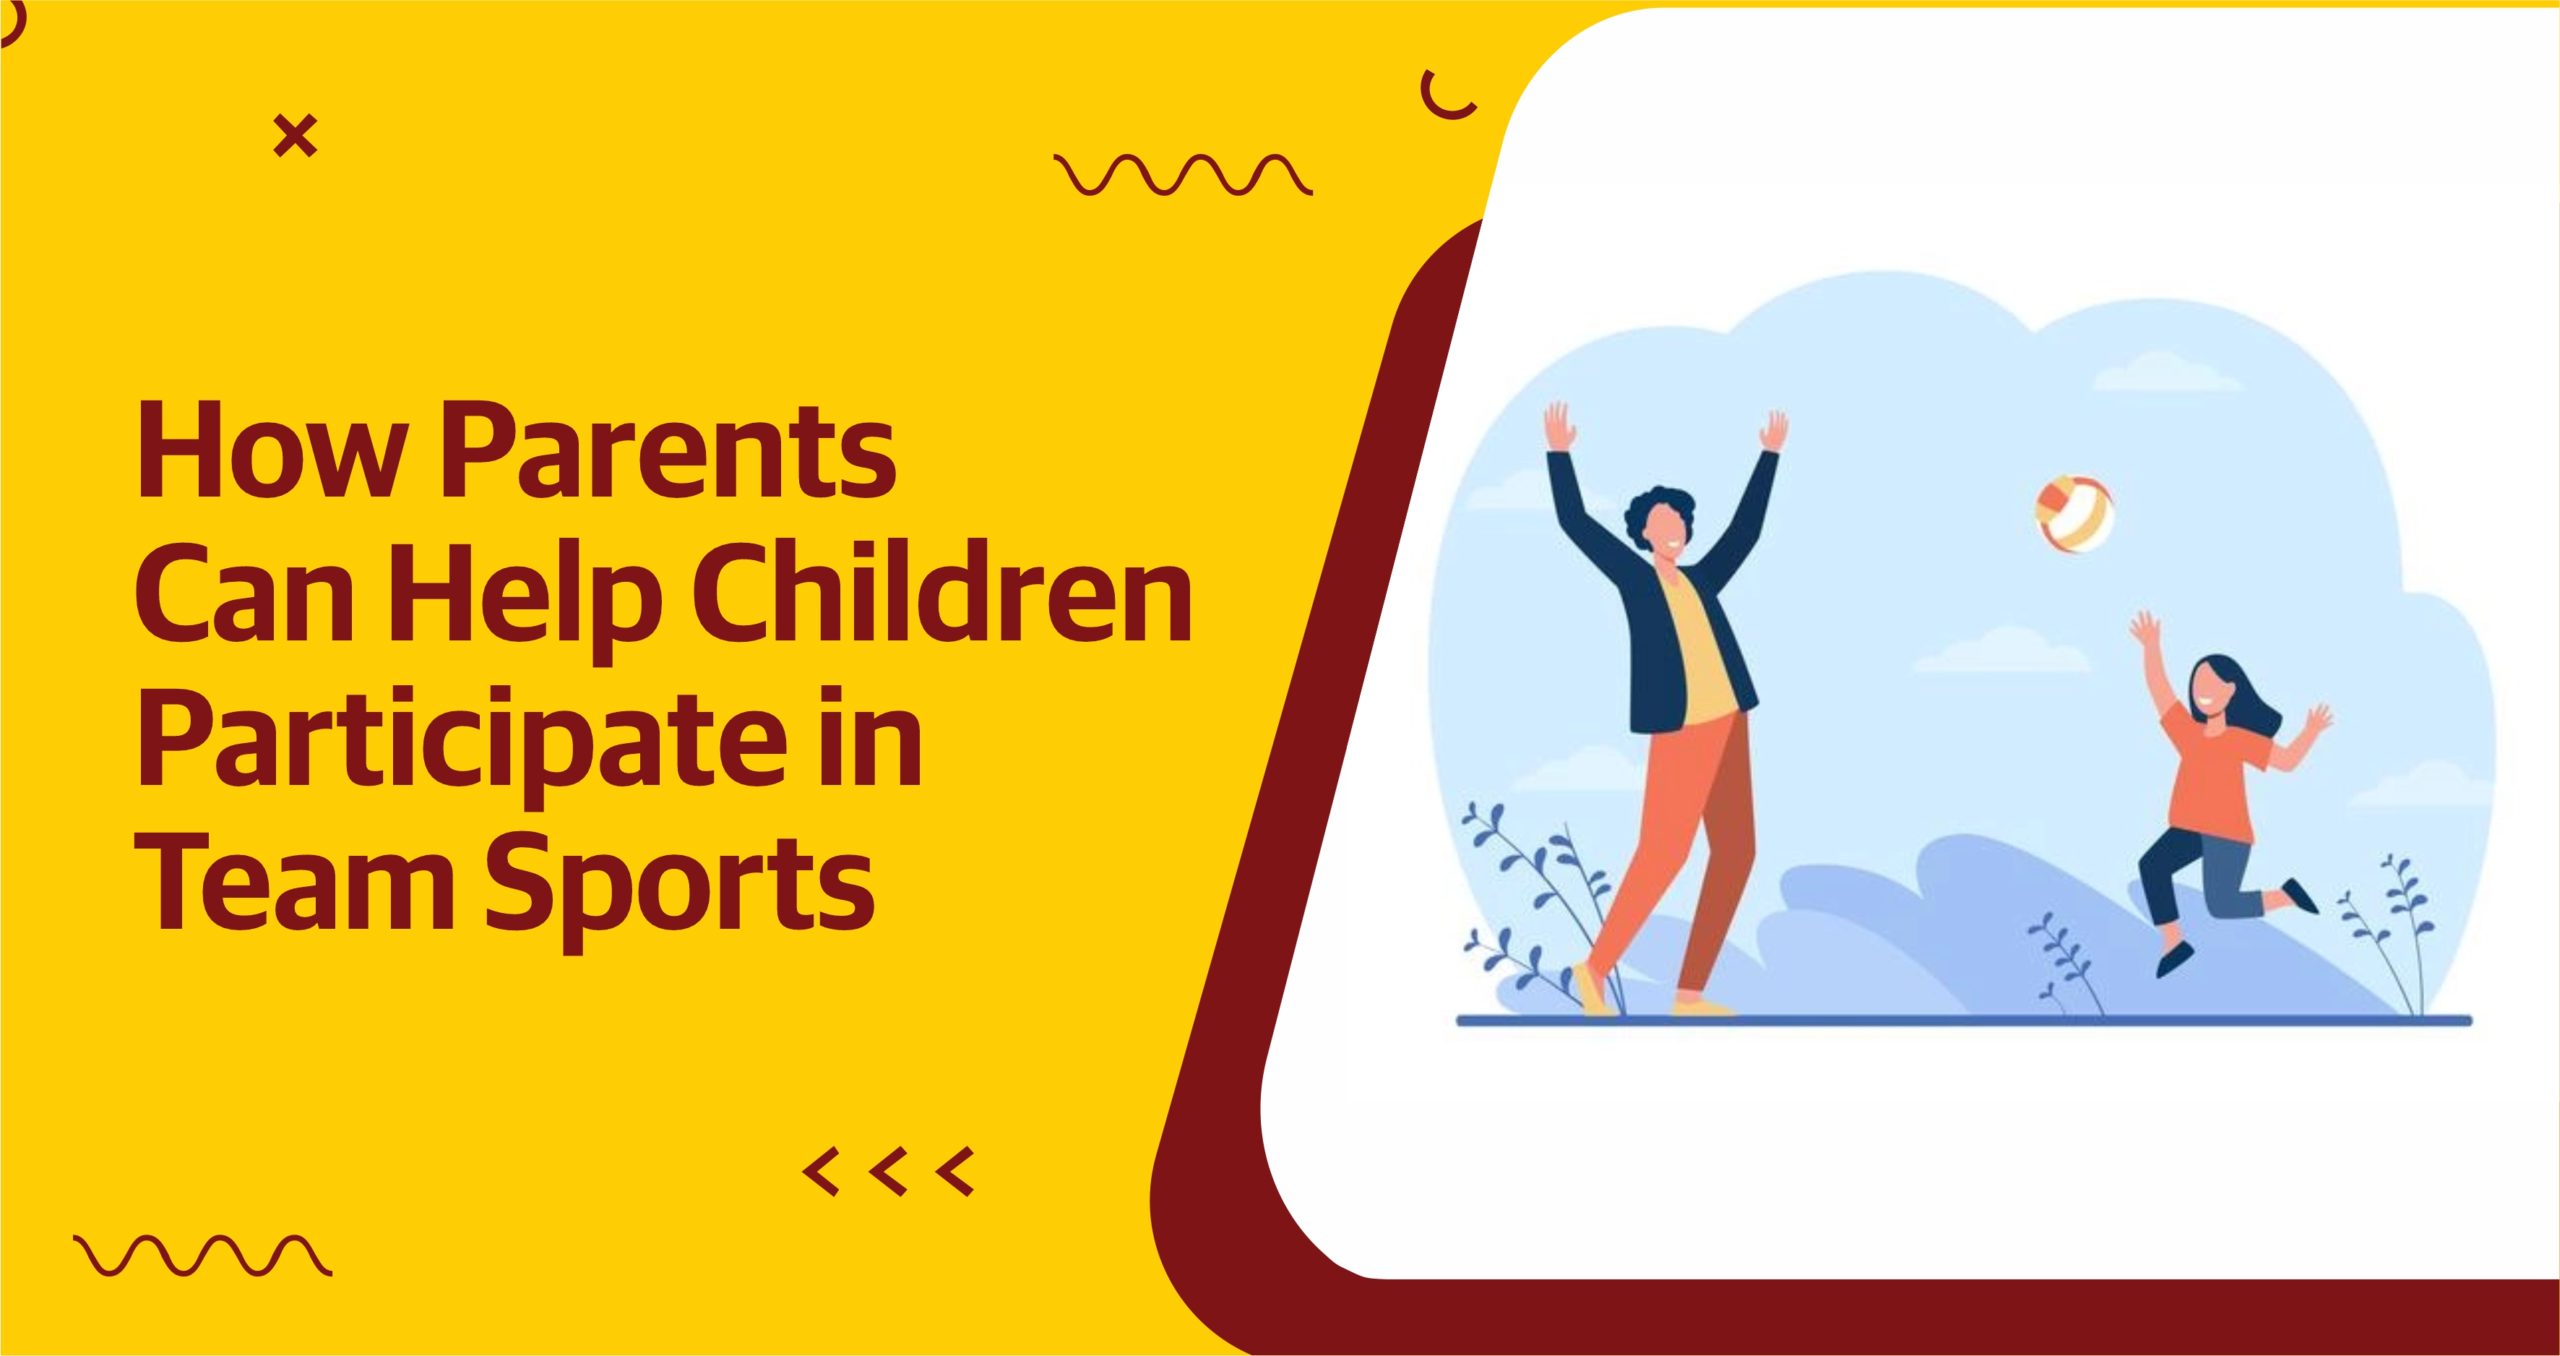 How Parents Can Help Children Participate in Team Sports